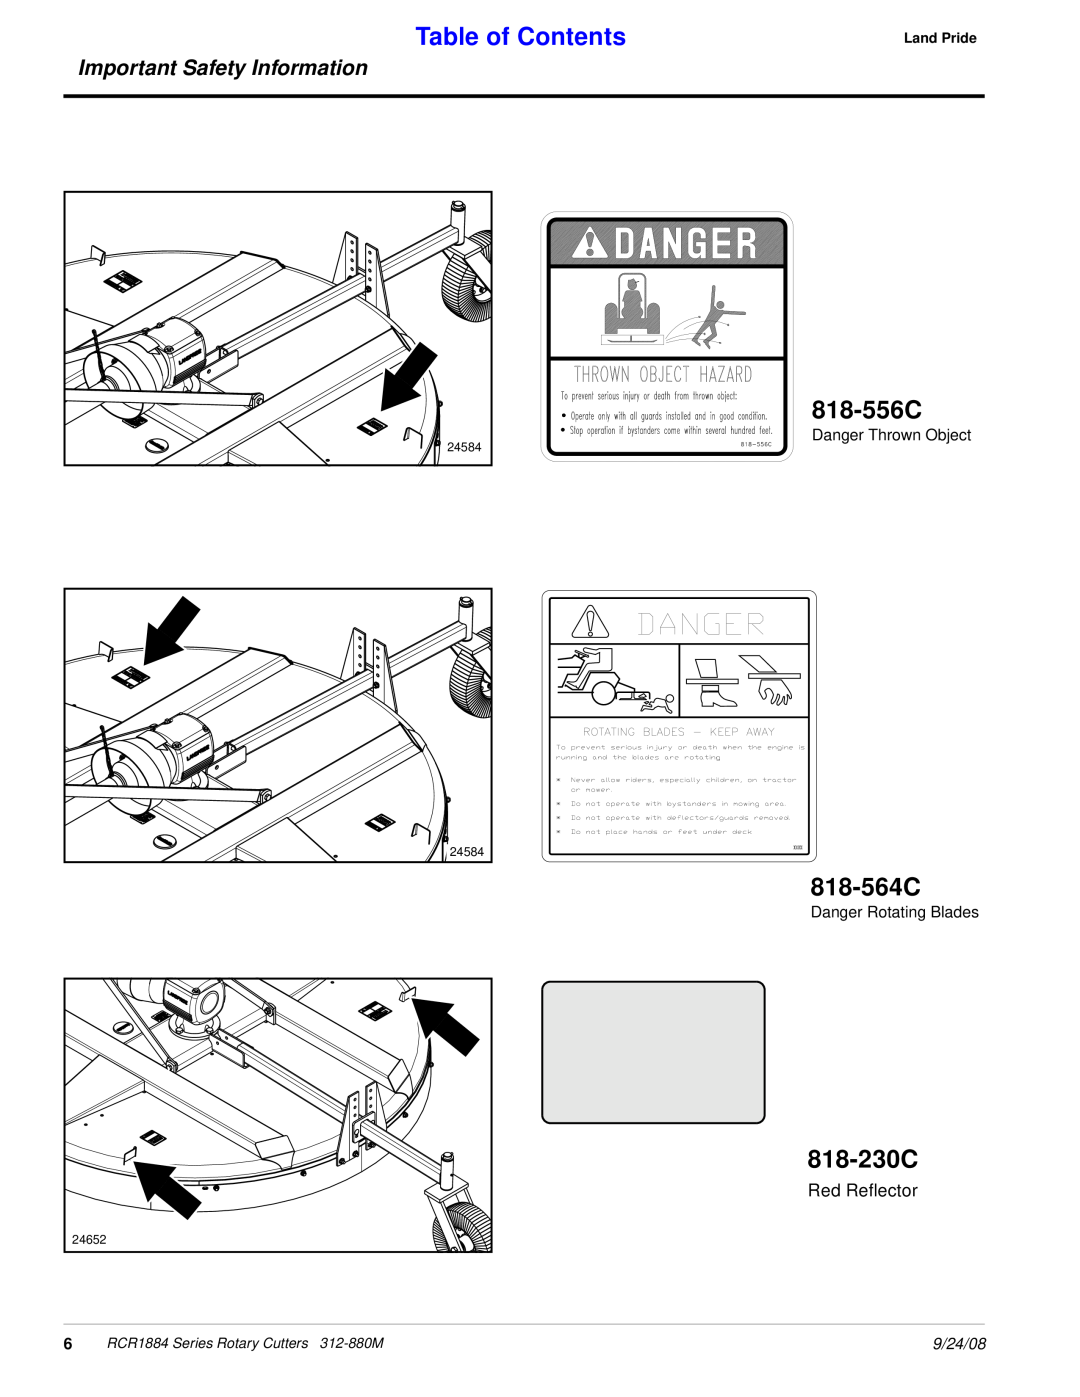 Land Pride RCR1884 818-556C, 818-564C, 818-230C, Table of Contents, Important Safety Information, Red Reflector, 9/24/08 